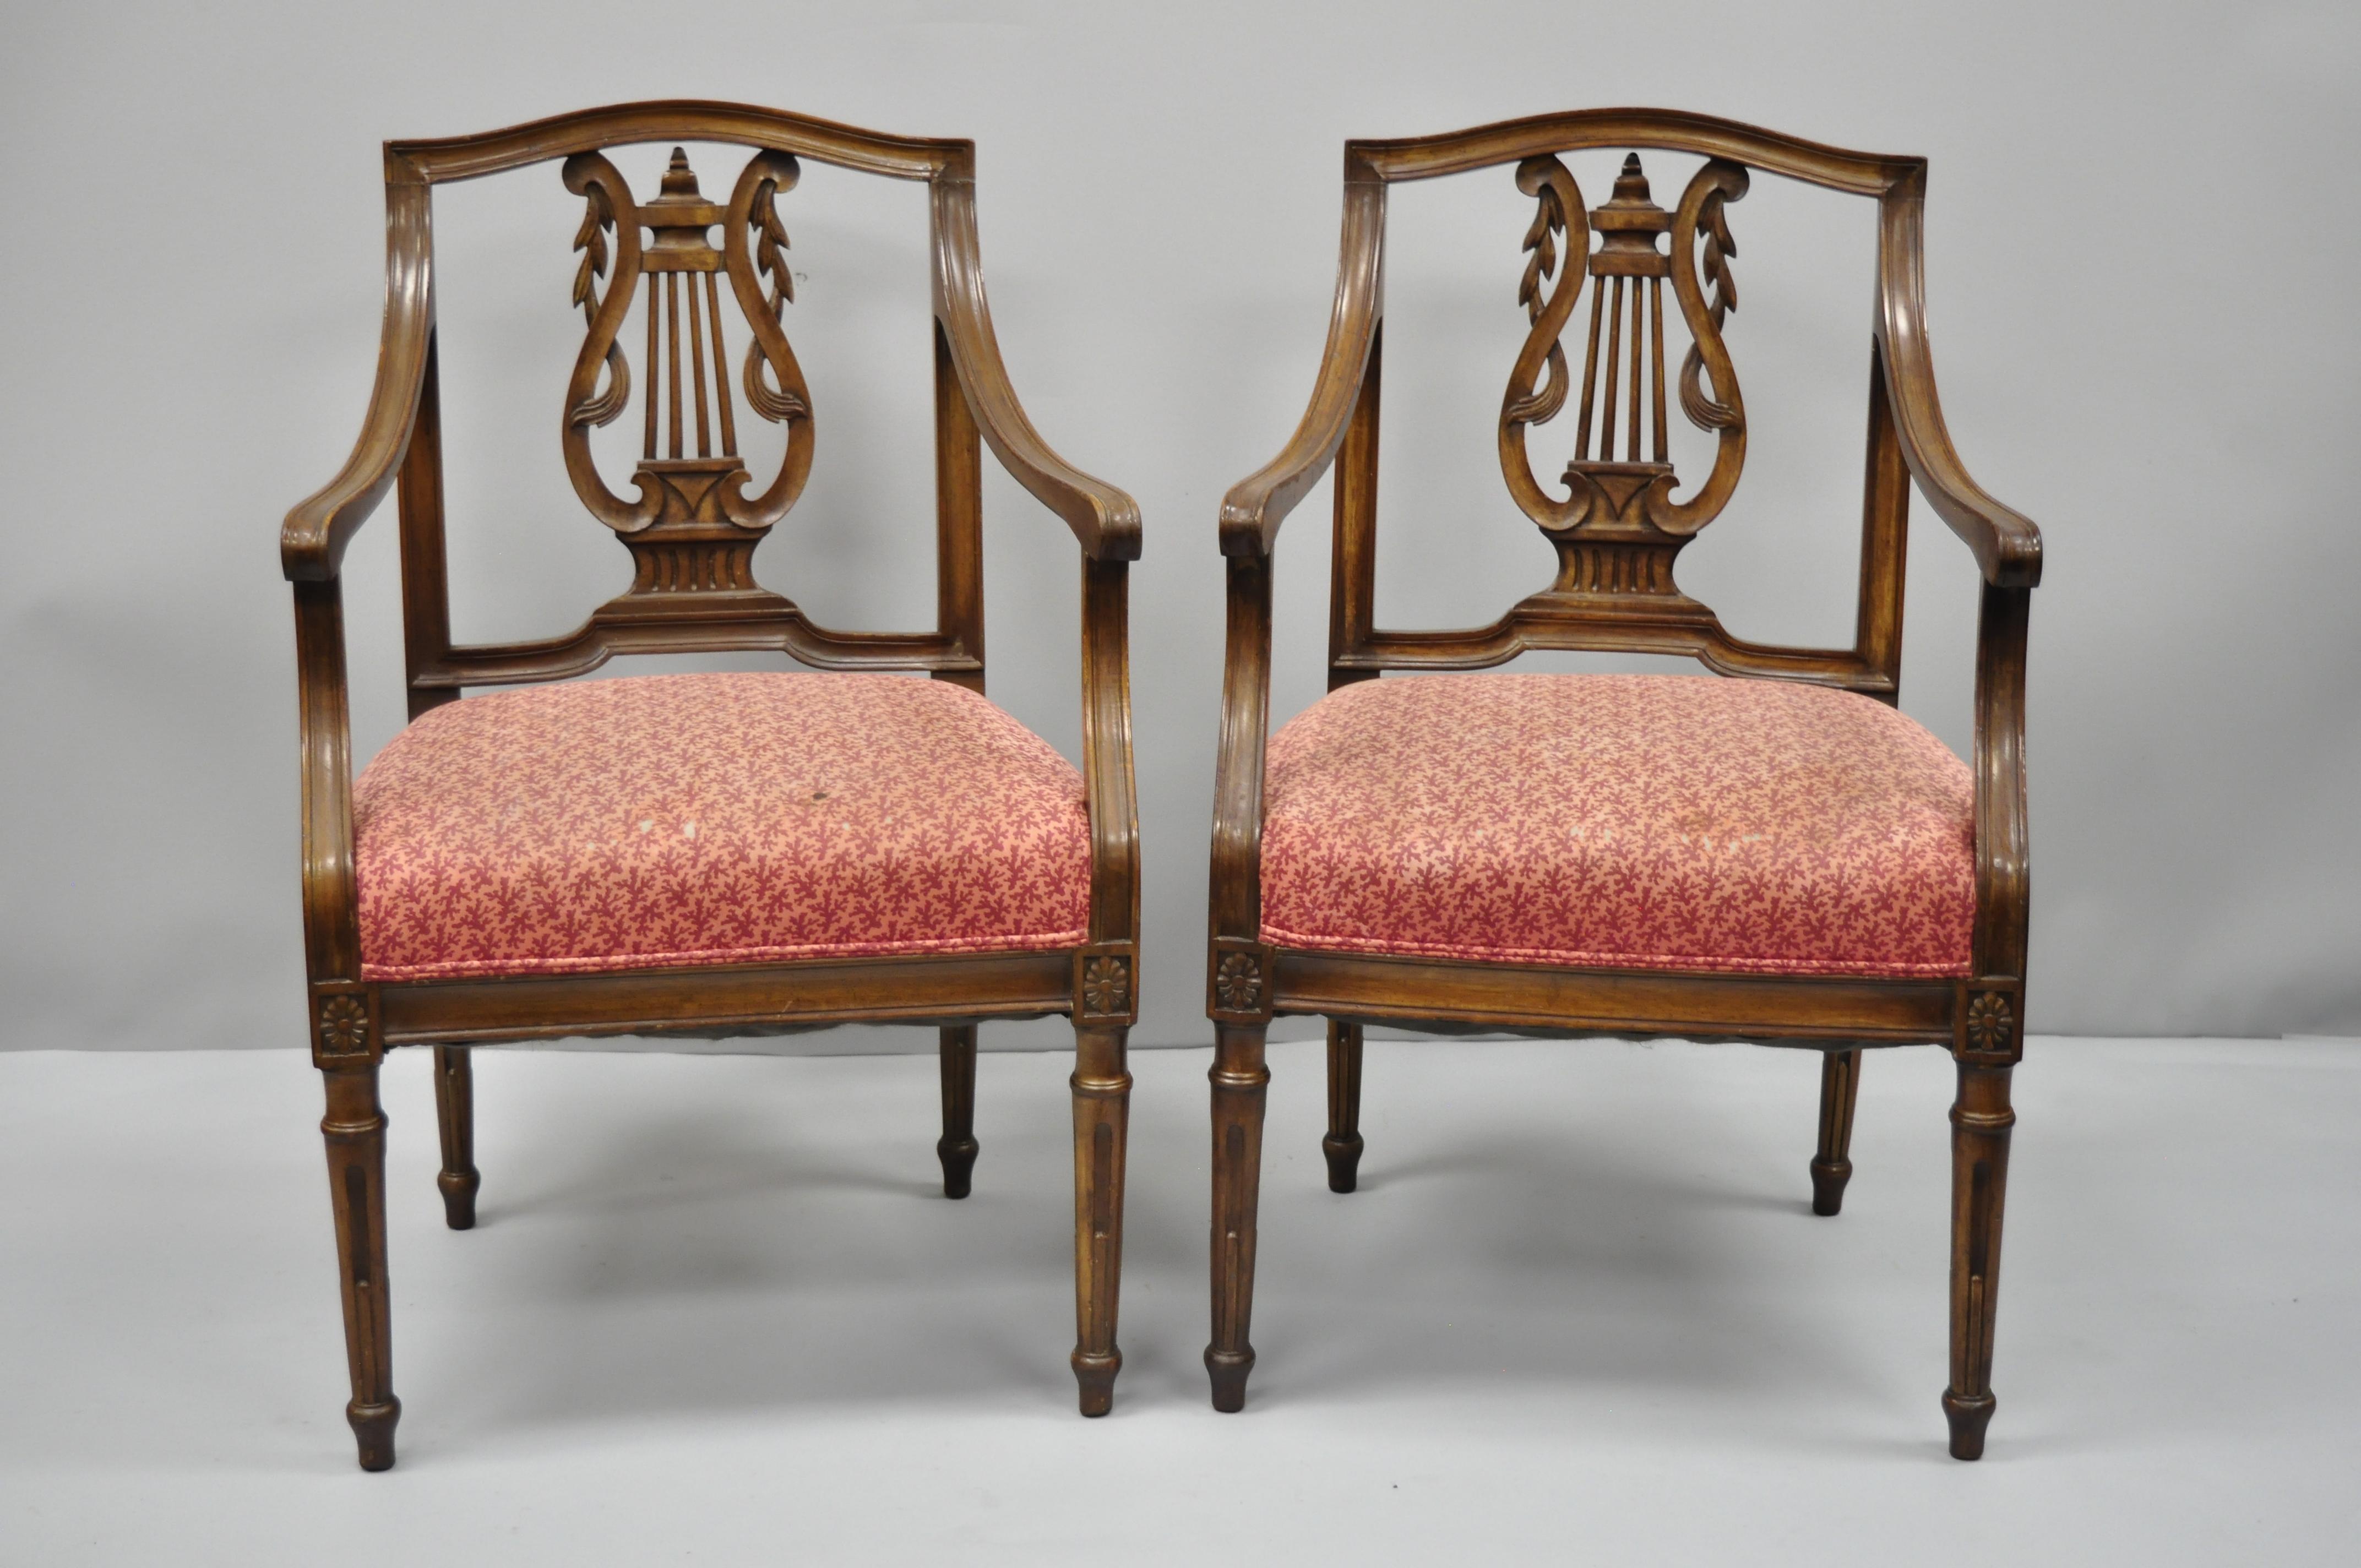 Pair of antique Louis XVI French style lyre back Italian armchairs. Items feature carved lyre backs, smaller attractive frames, solid wood construction, tapered legs, great style and form, circa early 20th century. Measurements: 34.5